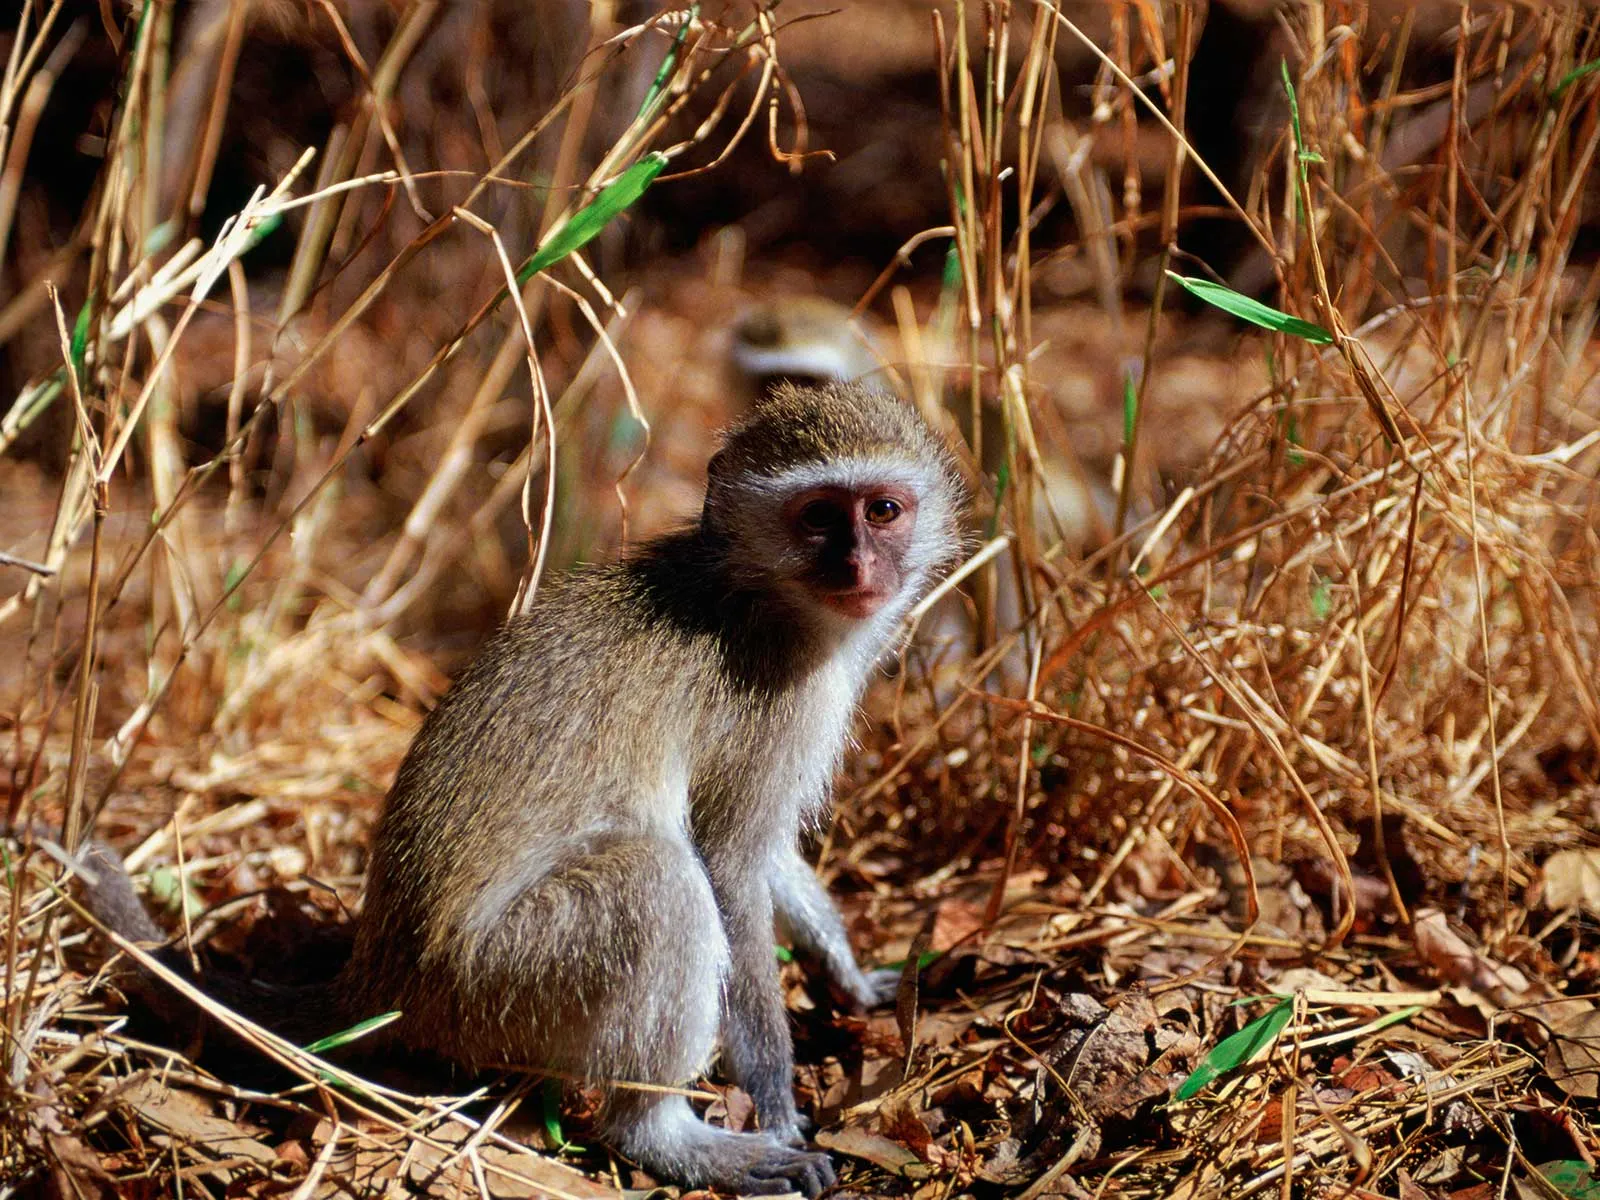 Monkeys can adapt by changing their diet •